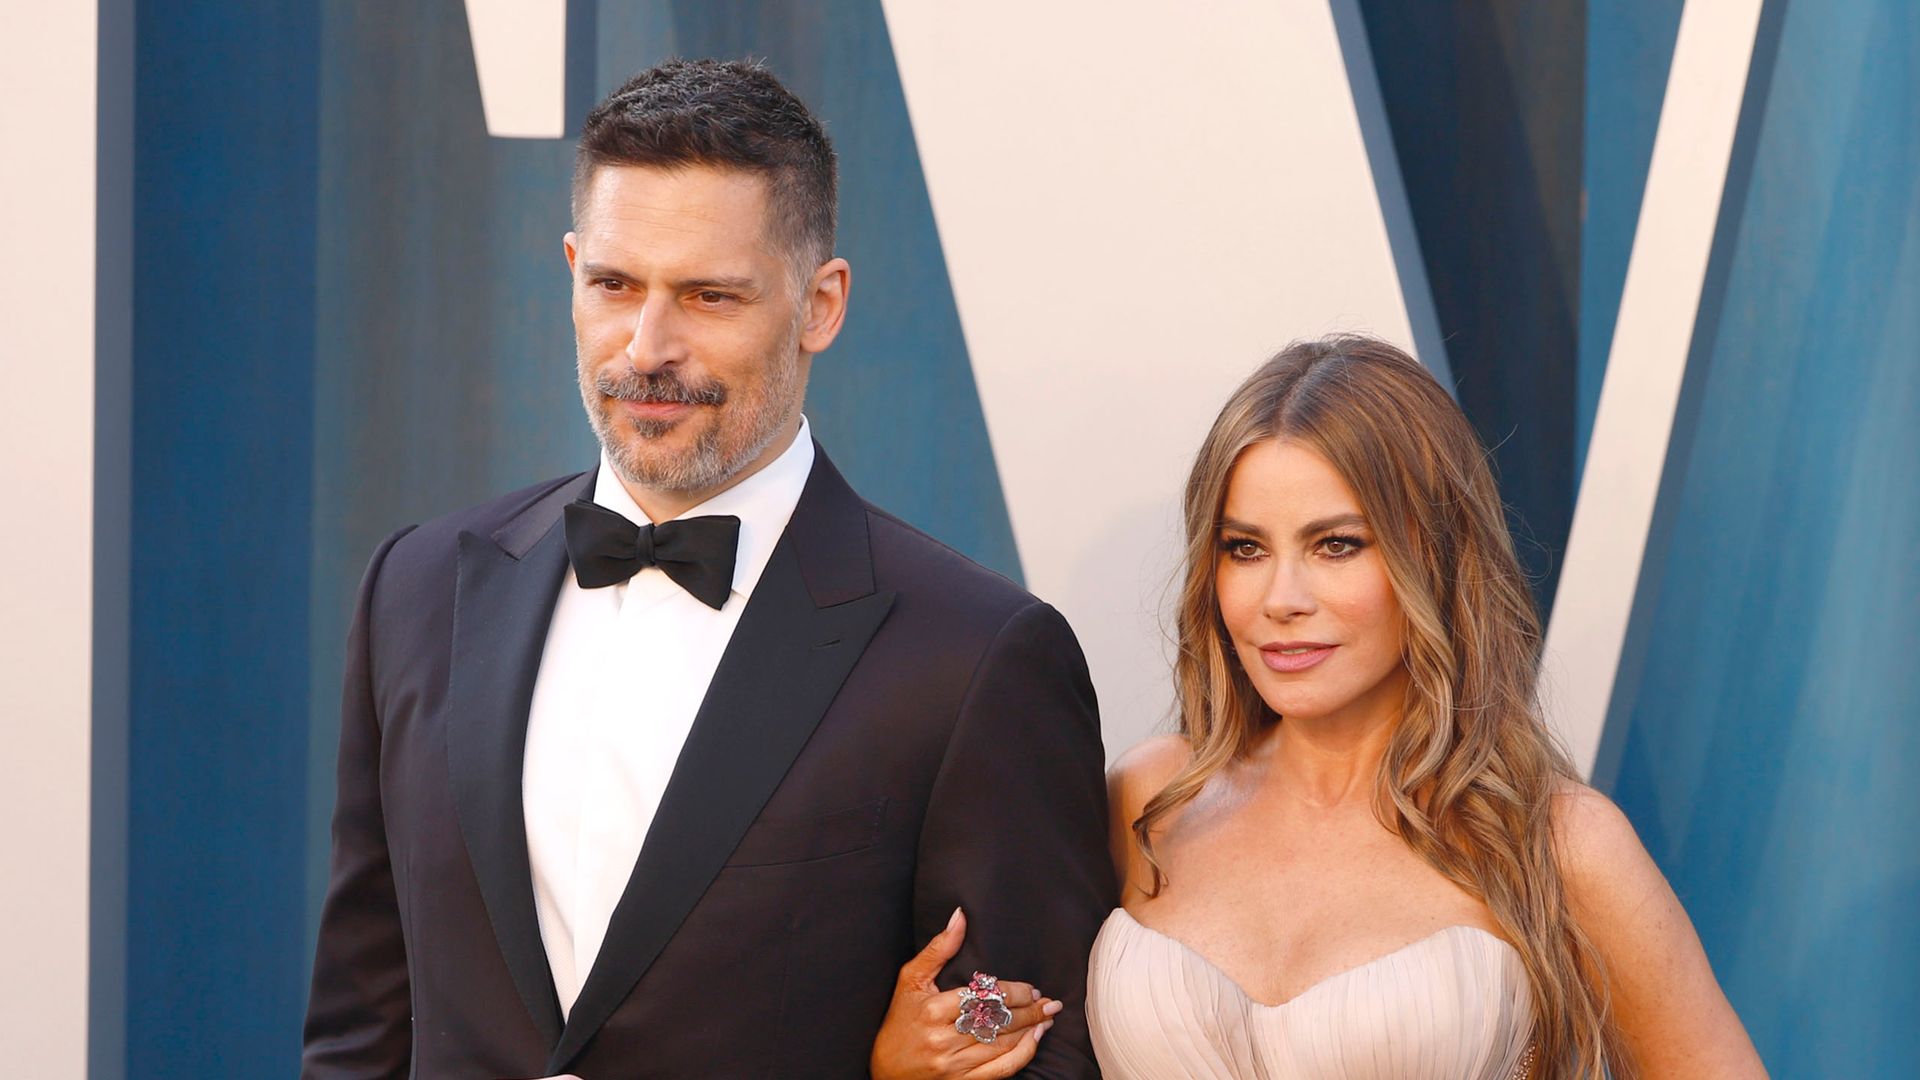 Joe Manganiello and Sofi­a Vergara attend the 2022 Vanity Fair Oscar Party Dinner at Wallis Annenberg Center for the Performing Arts on March 27, 2022 in Beverly Hills, California